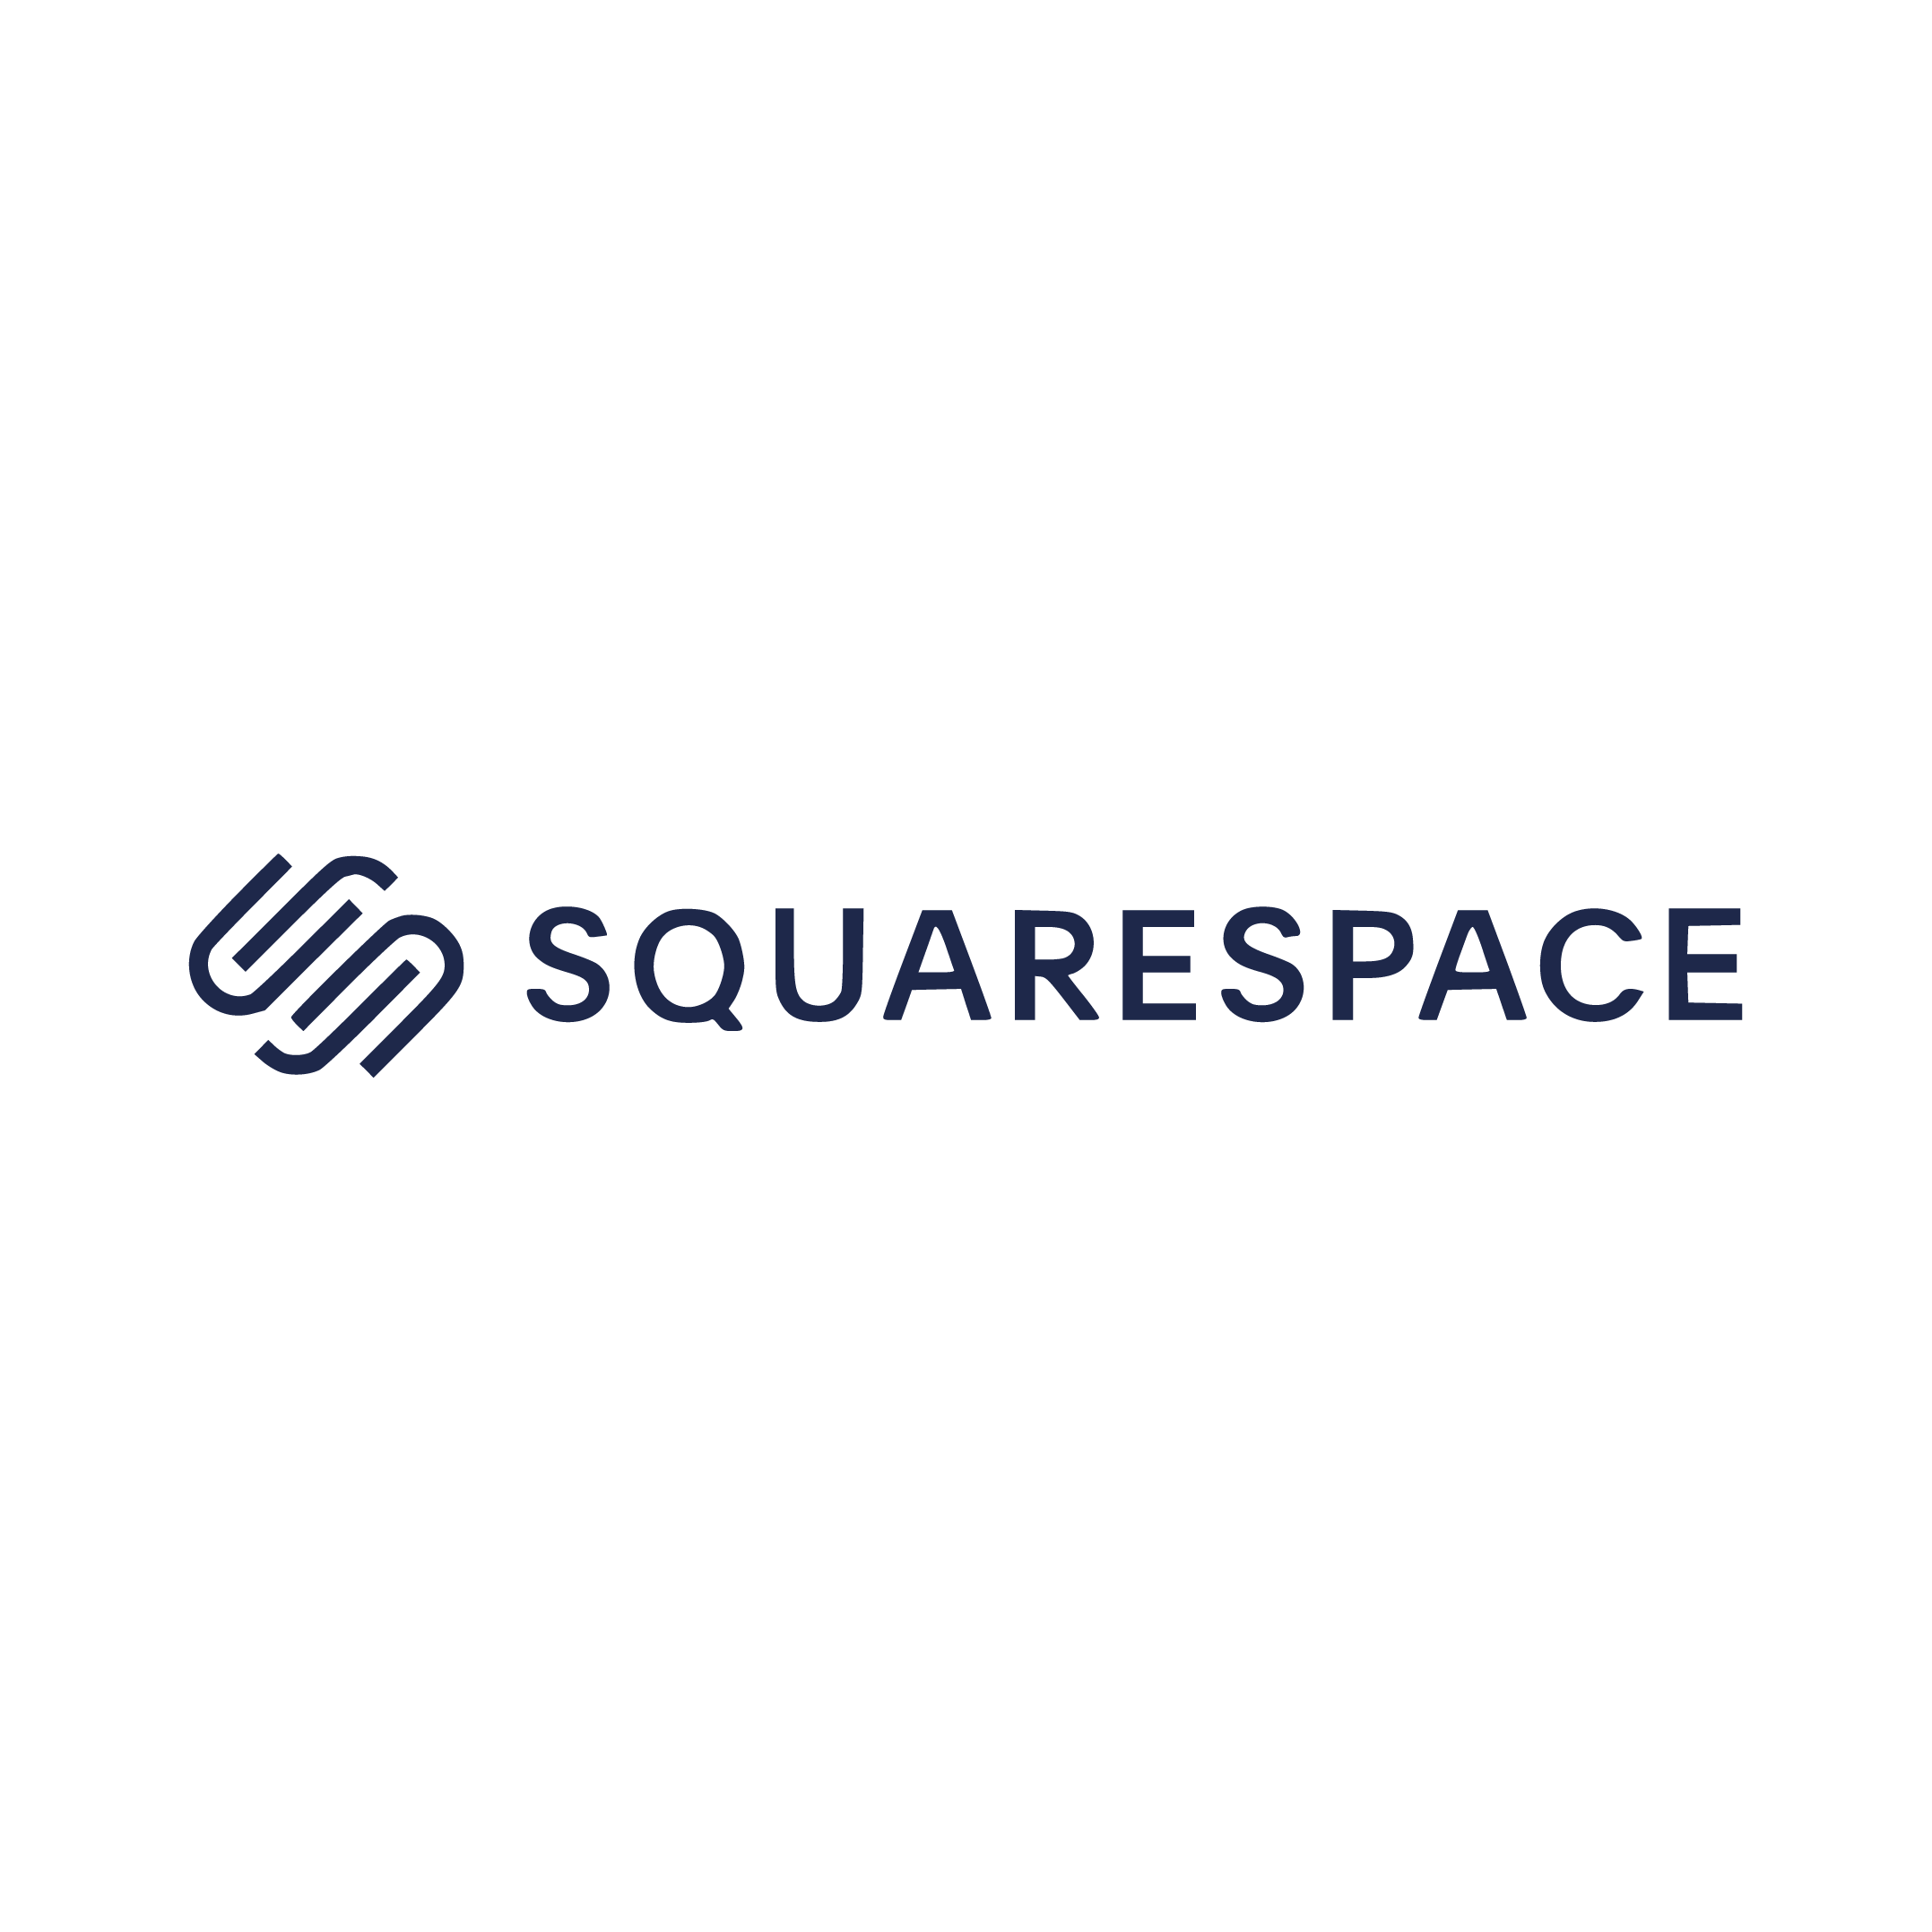 Squarespace_Partnership_SMS.png